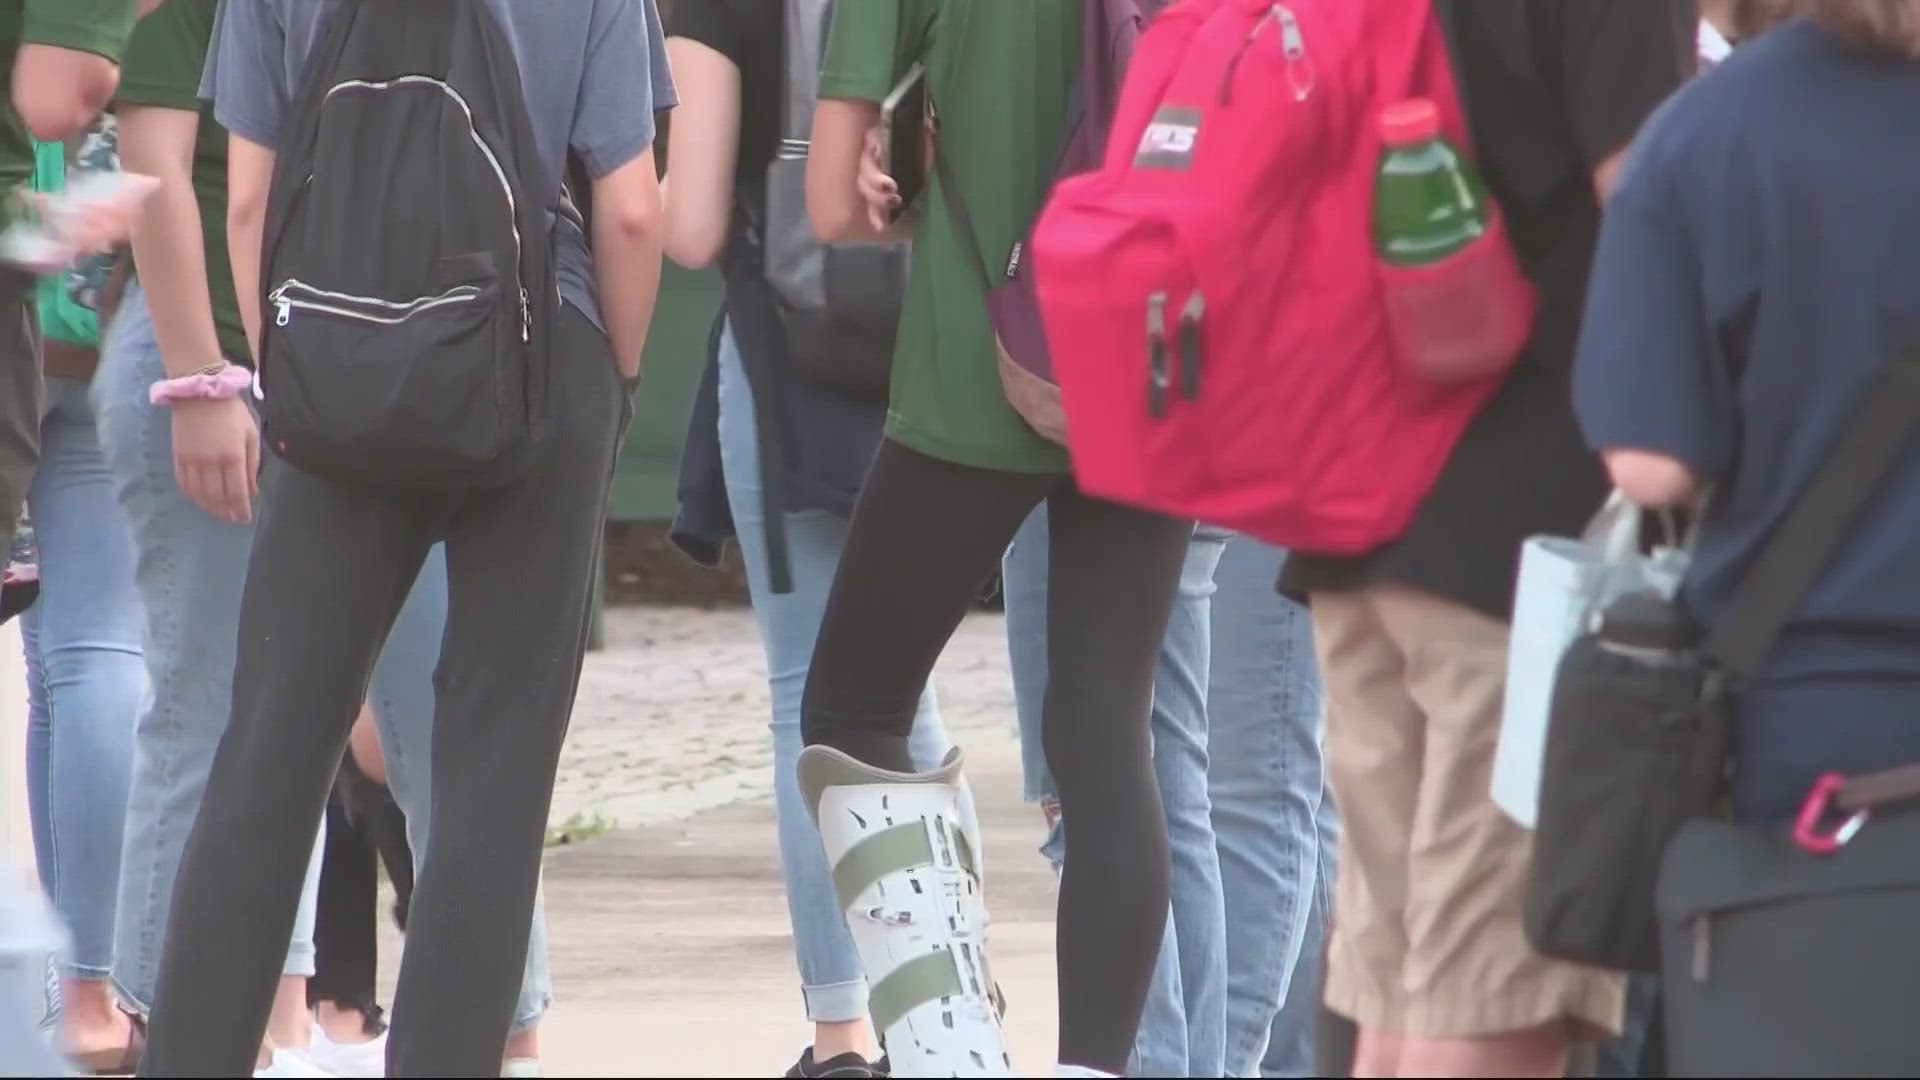 Local lawmakers and students in Jacksonville weigh in on the possible decision.